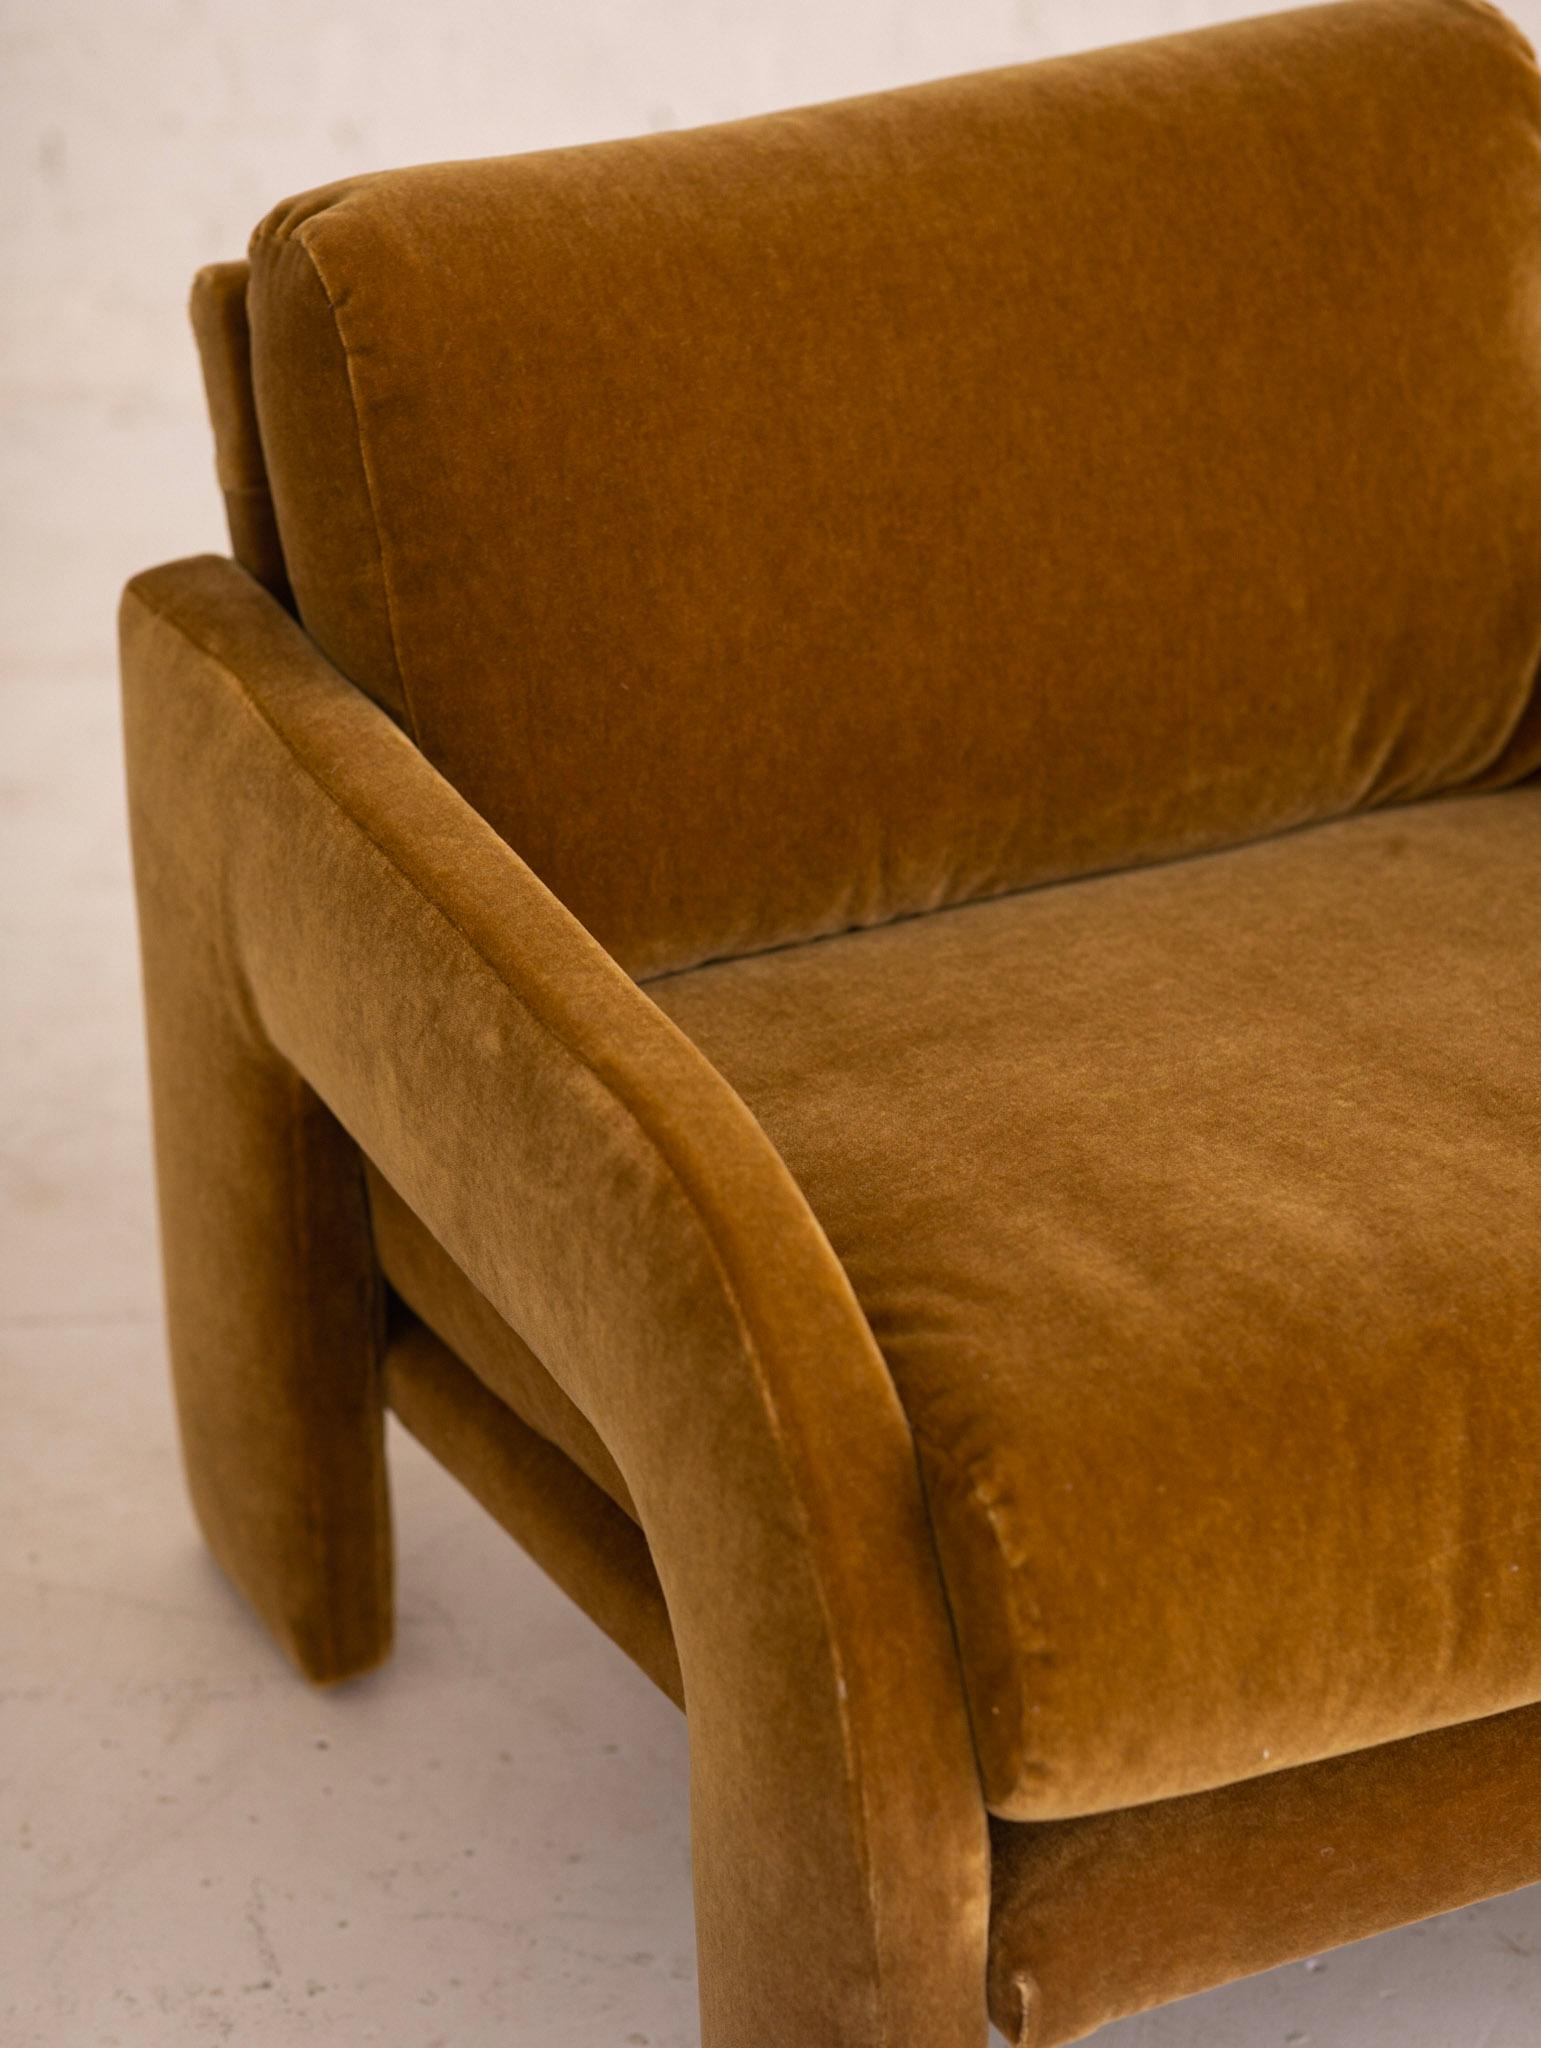 American 1980s Postmodern Architectural Armchair in Camel Mohair